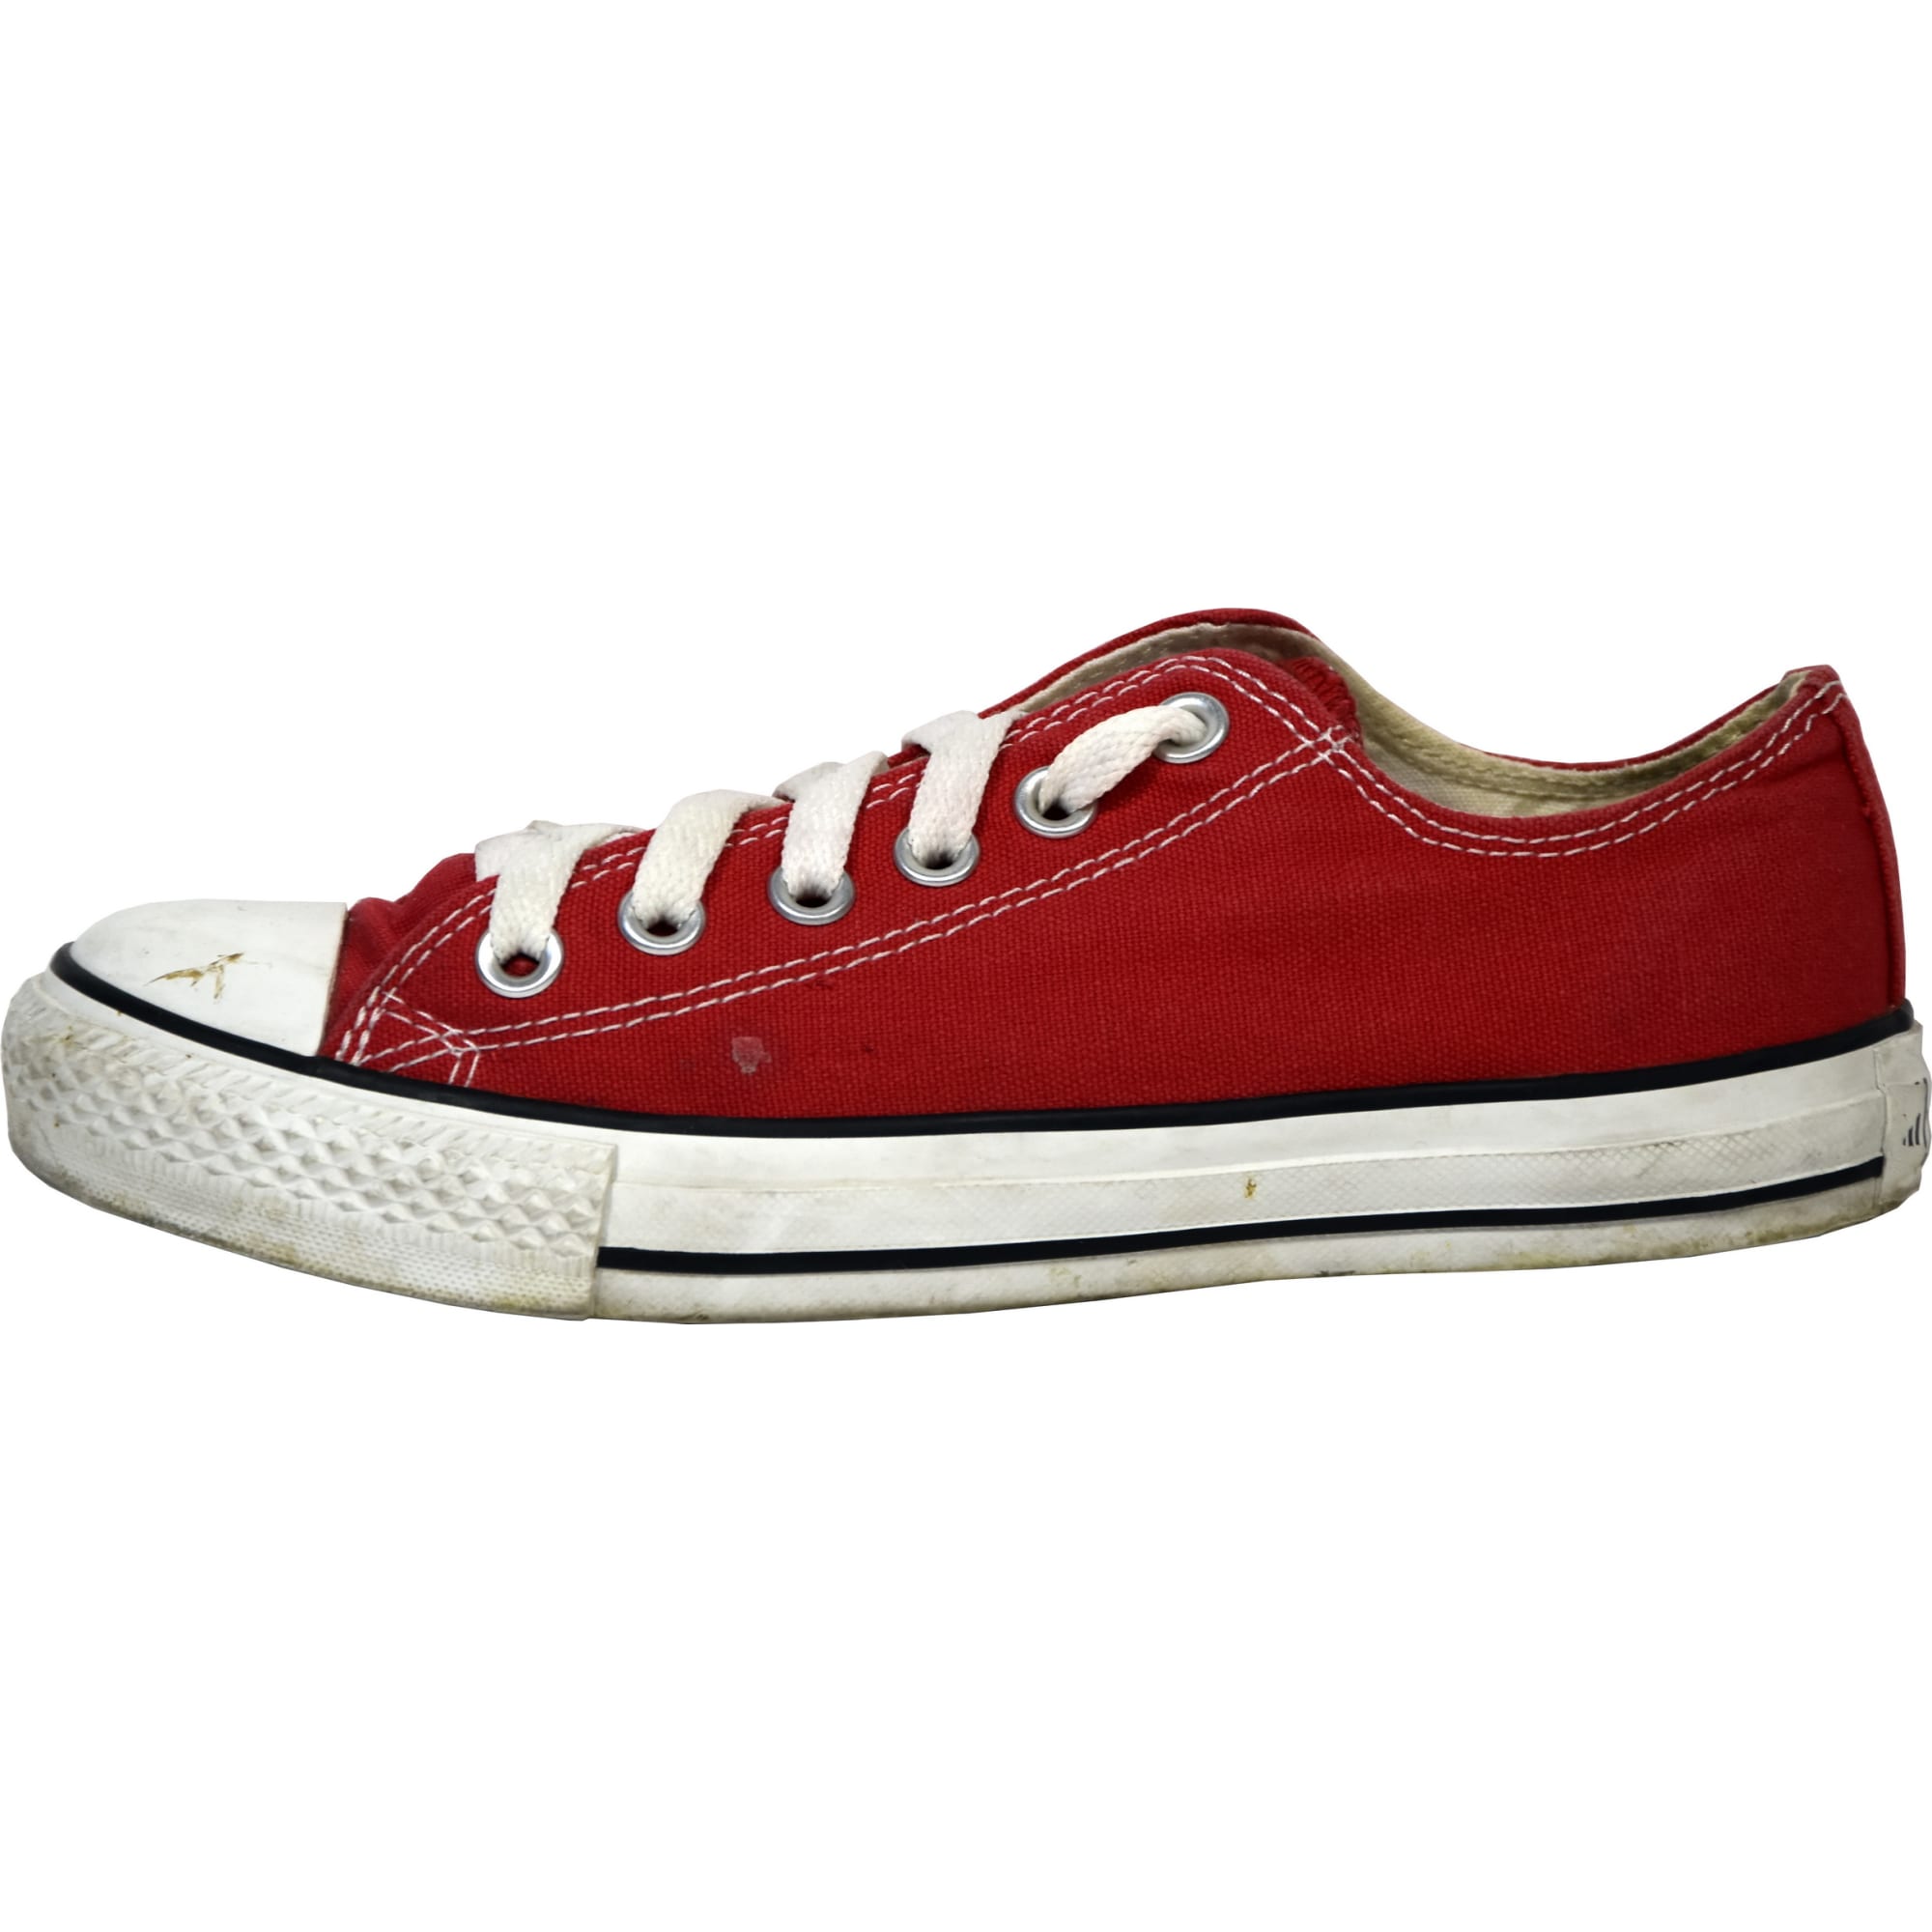 converse rouge taille 37